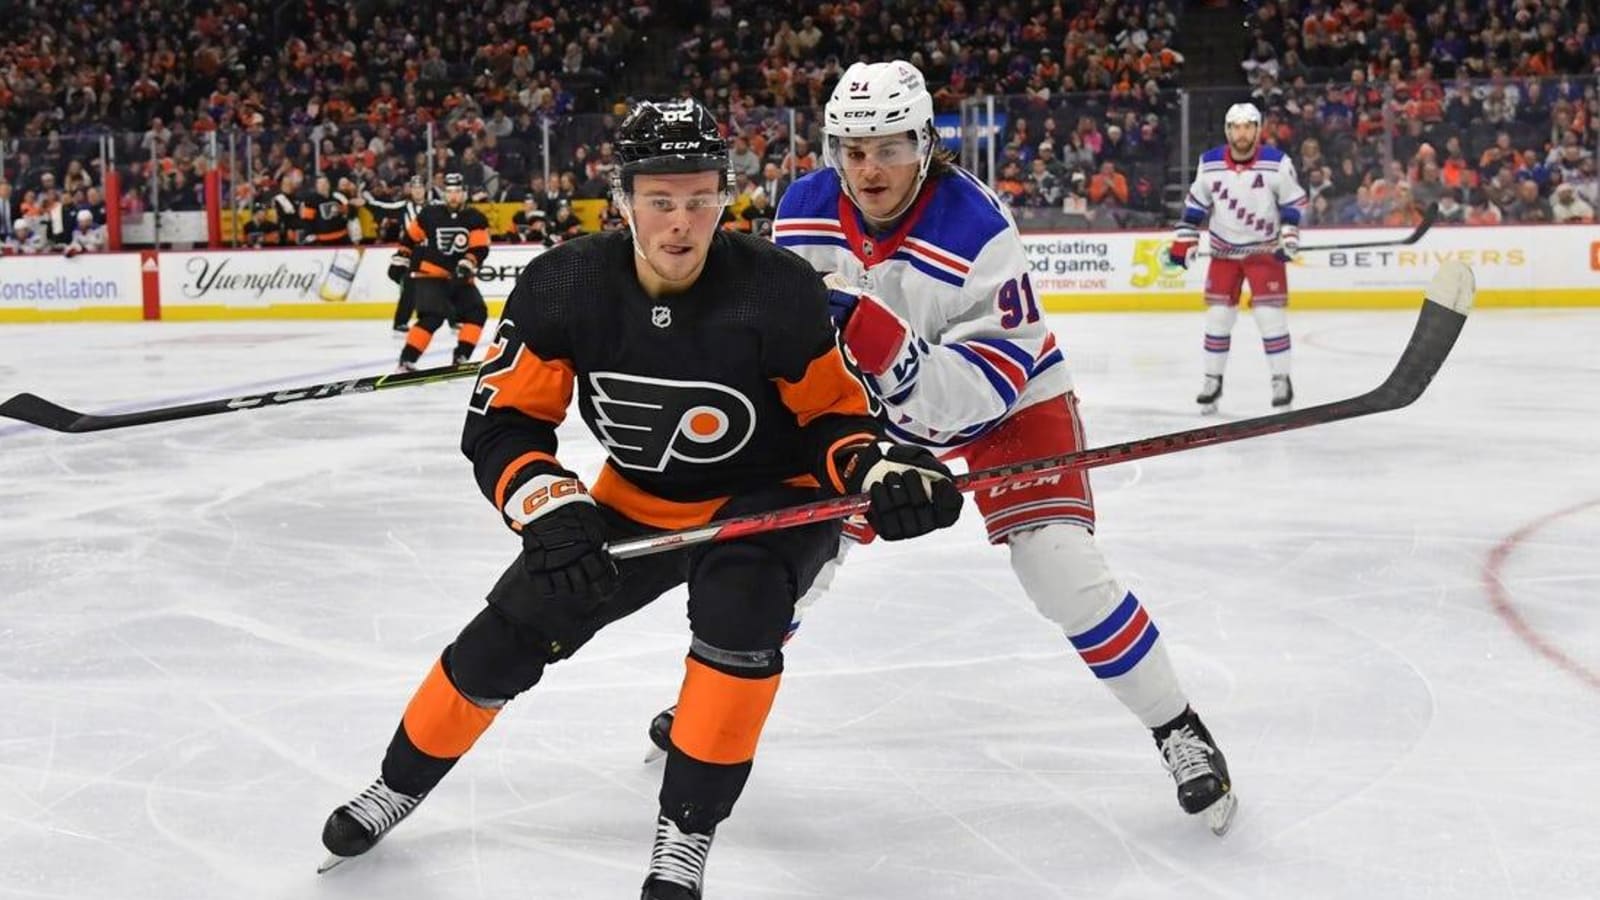 Six different Rangers score in win over Flyers